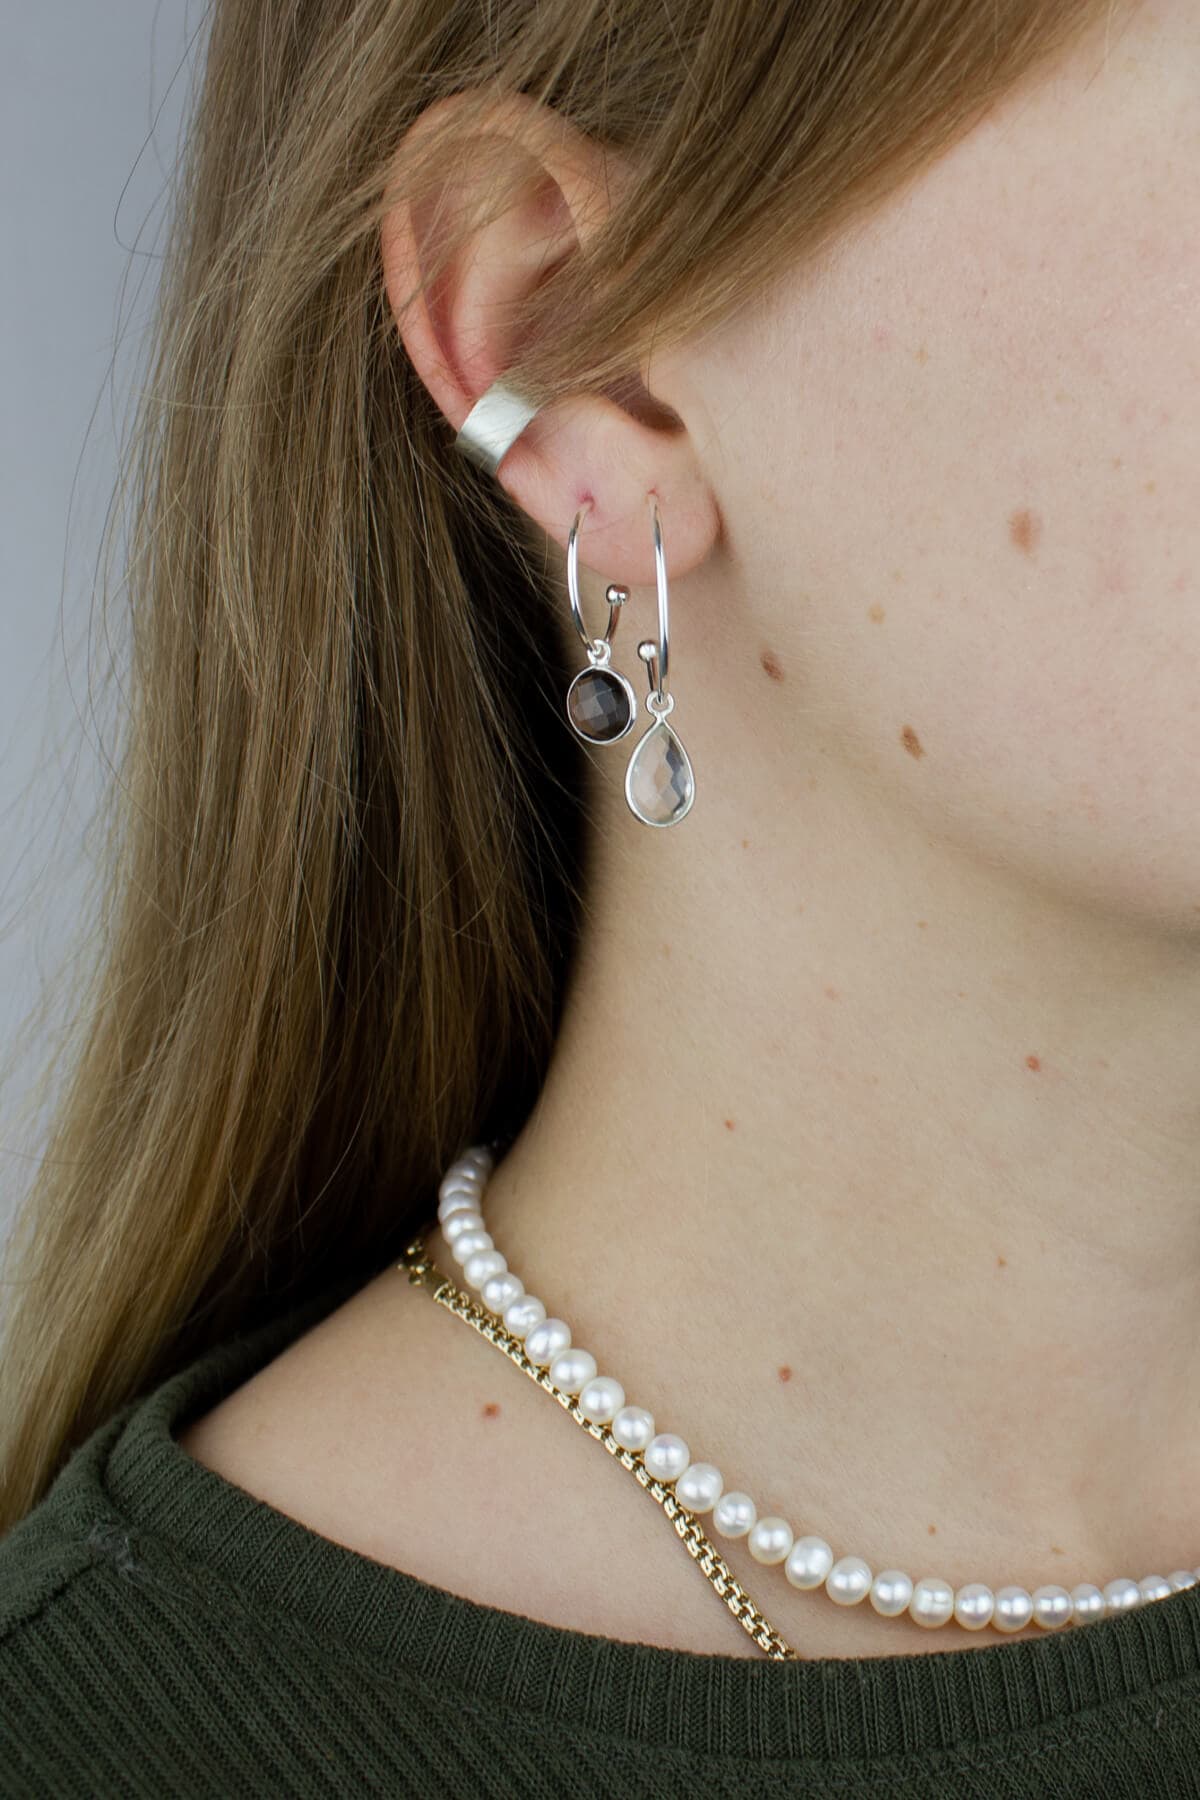 Silver hoop earrings with crystal quartz, silver ear cuff and pearl necklace on a model